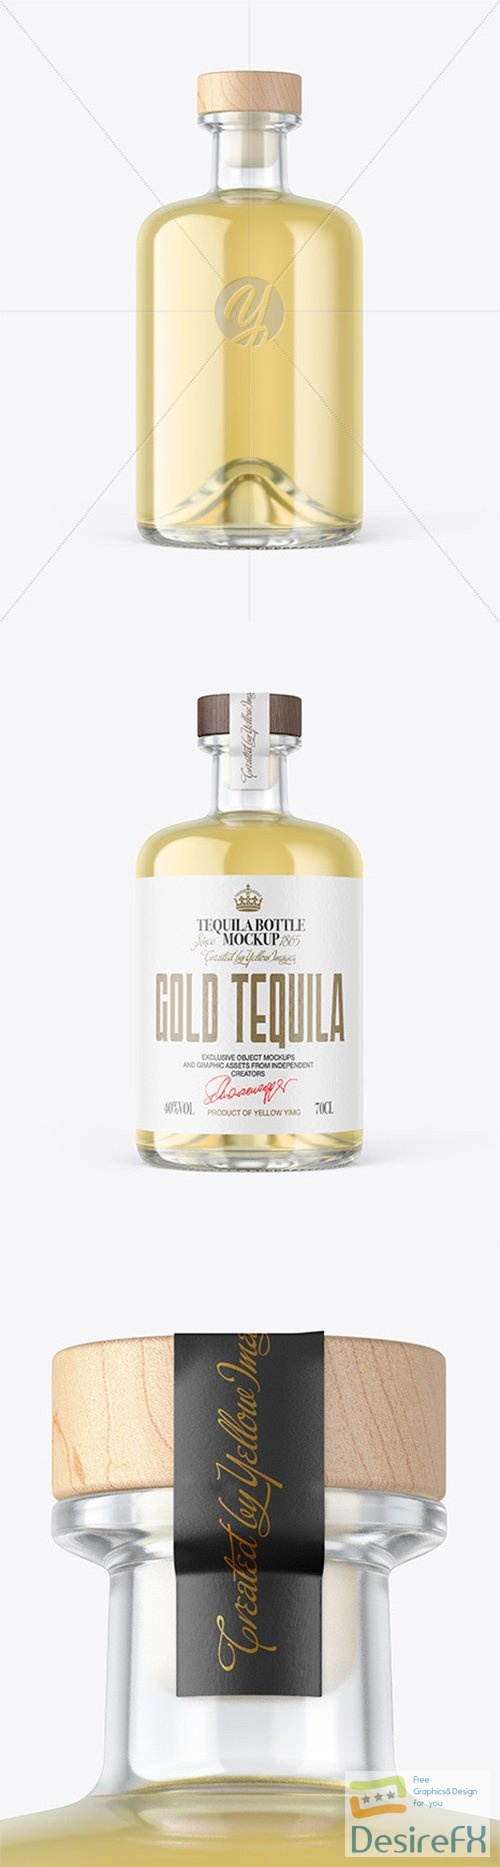 Gold Tequila Bottle with Wooden Cap Mockup 79841 TIF